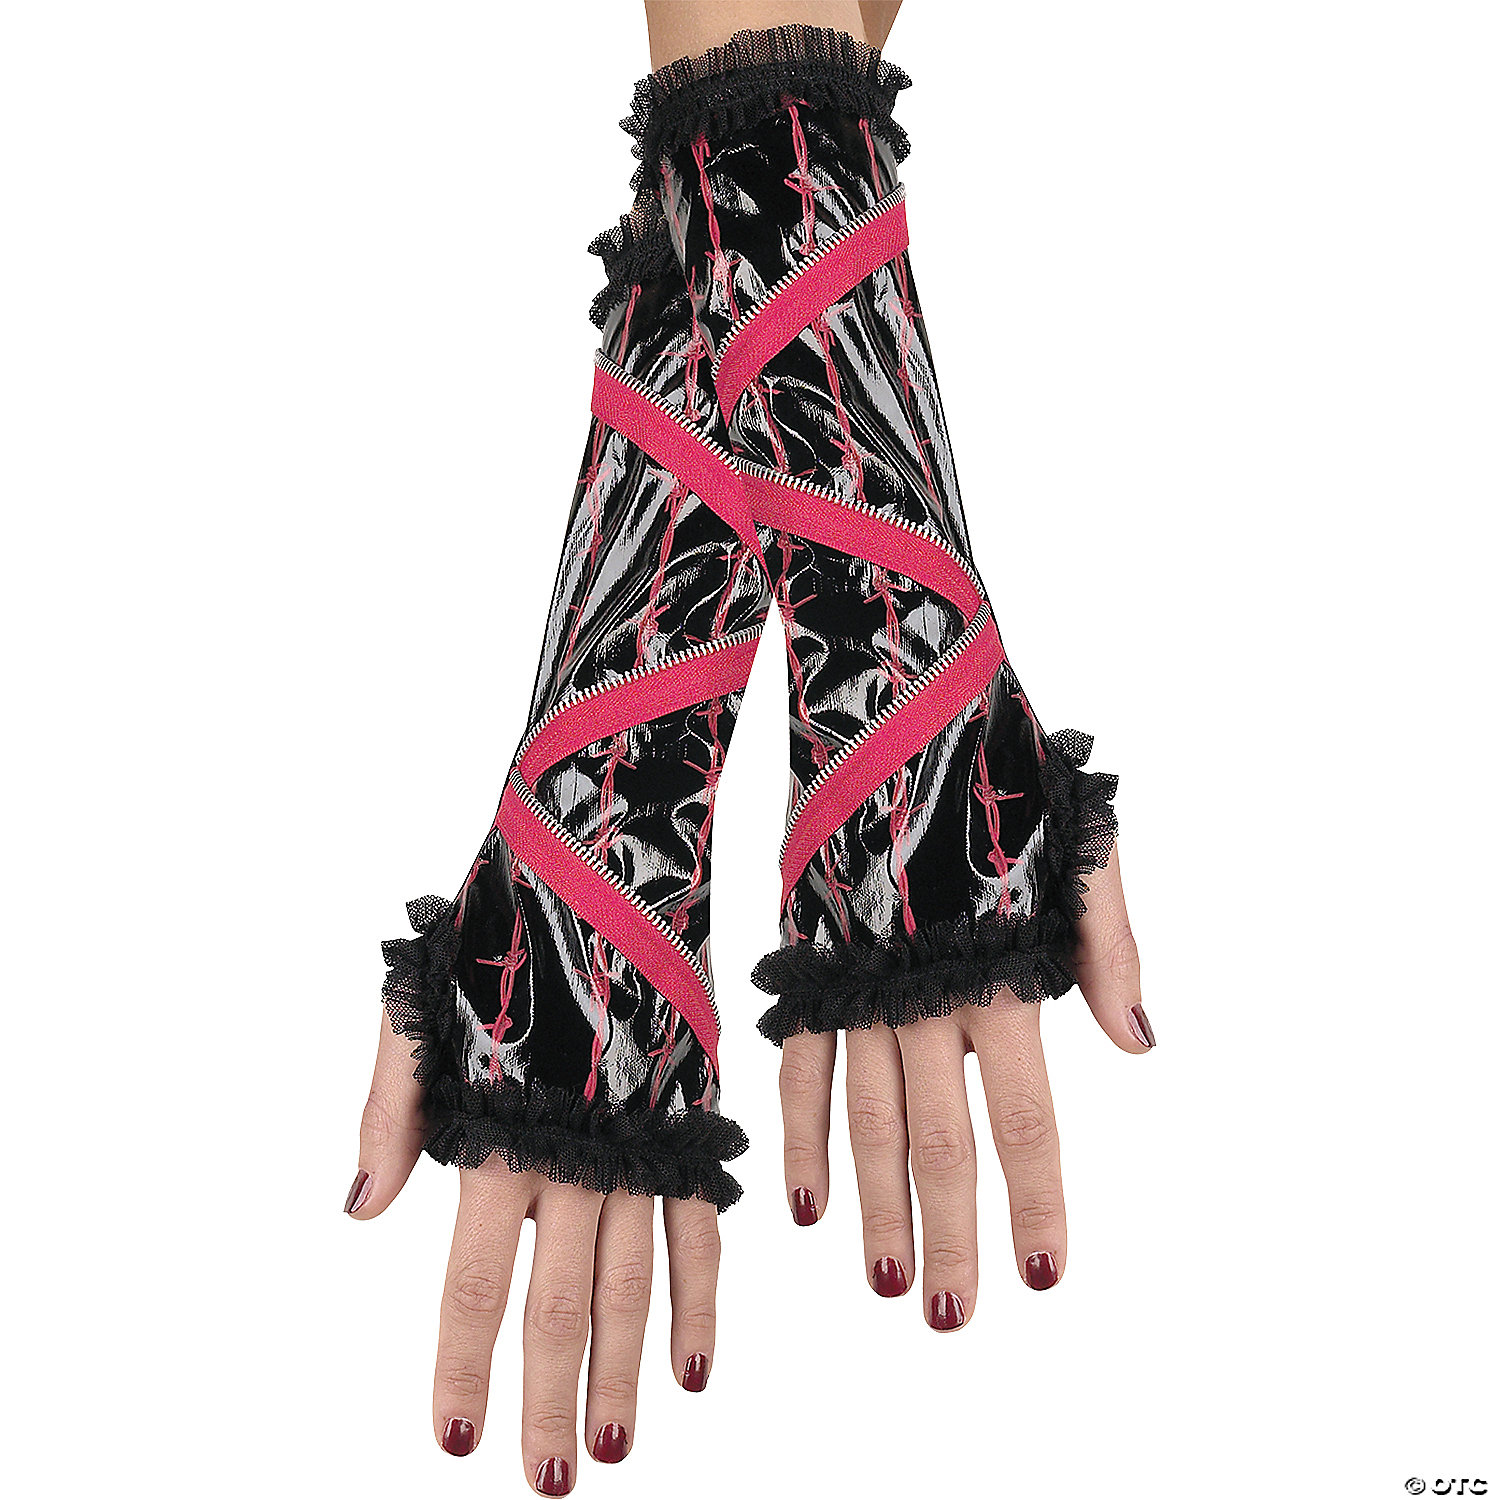 Zipper Gloves by Disguise